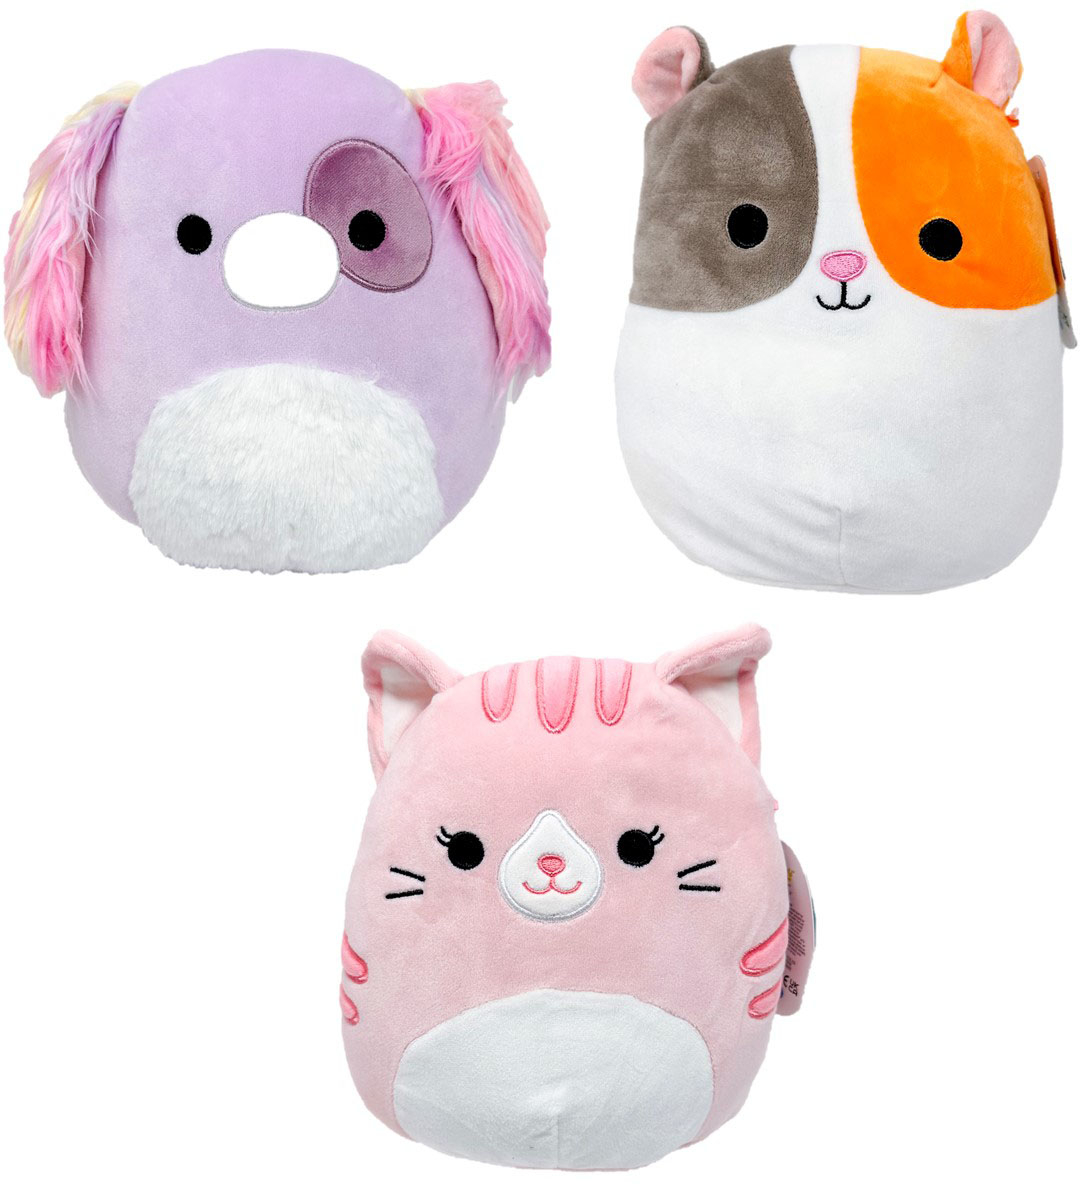 Squishmallows Might Be Your New Favorite Friend